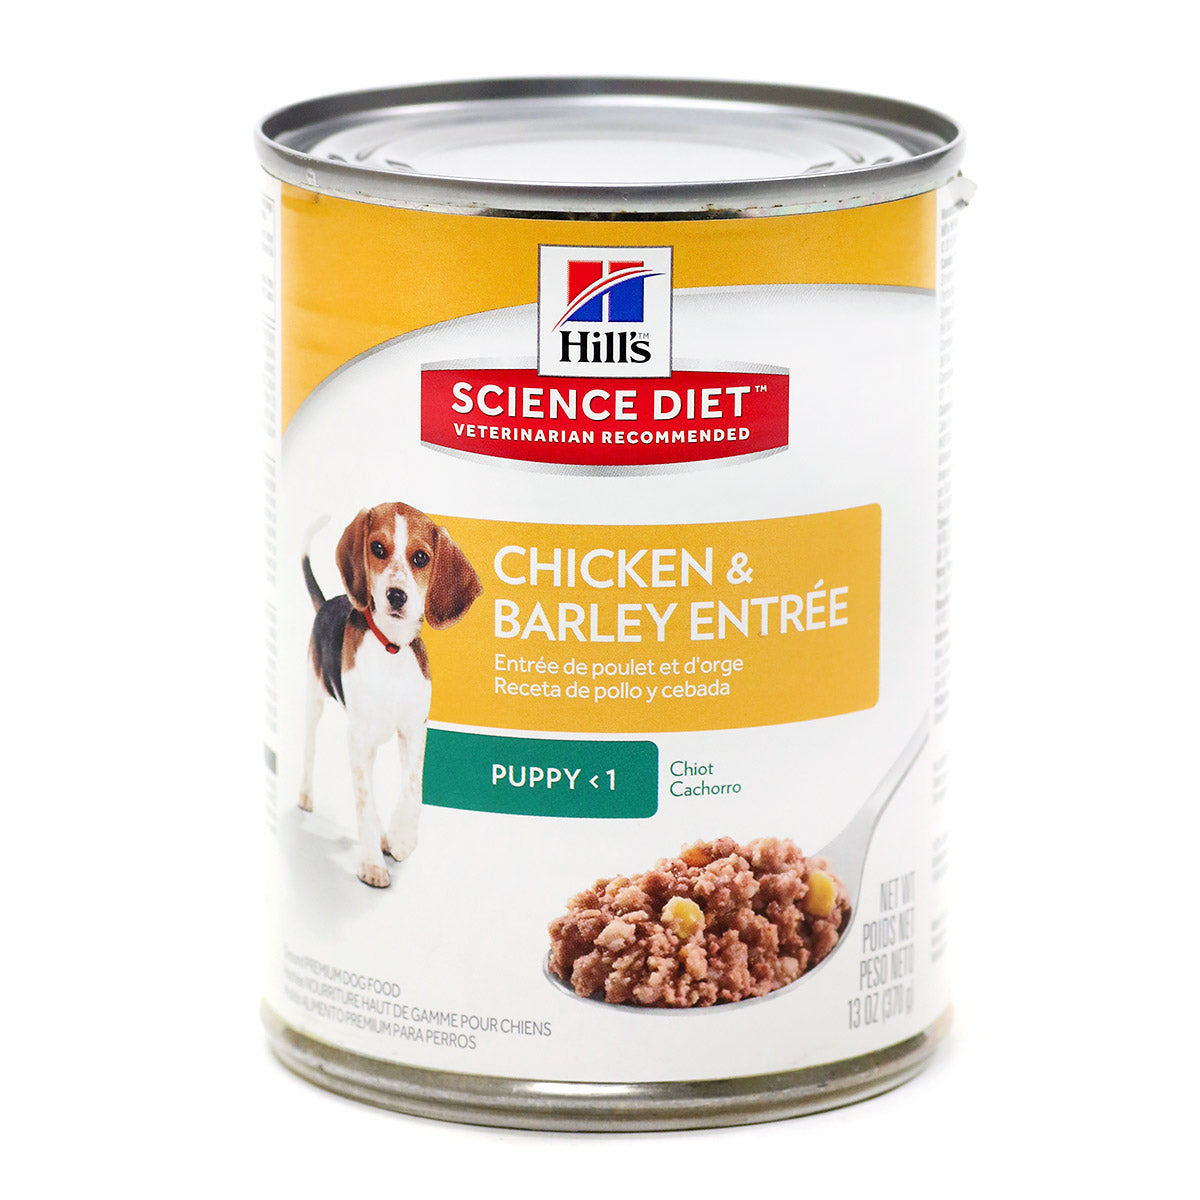 Hill's Science Diet Puppy Canned 12 x 370gm Cans (case)